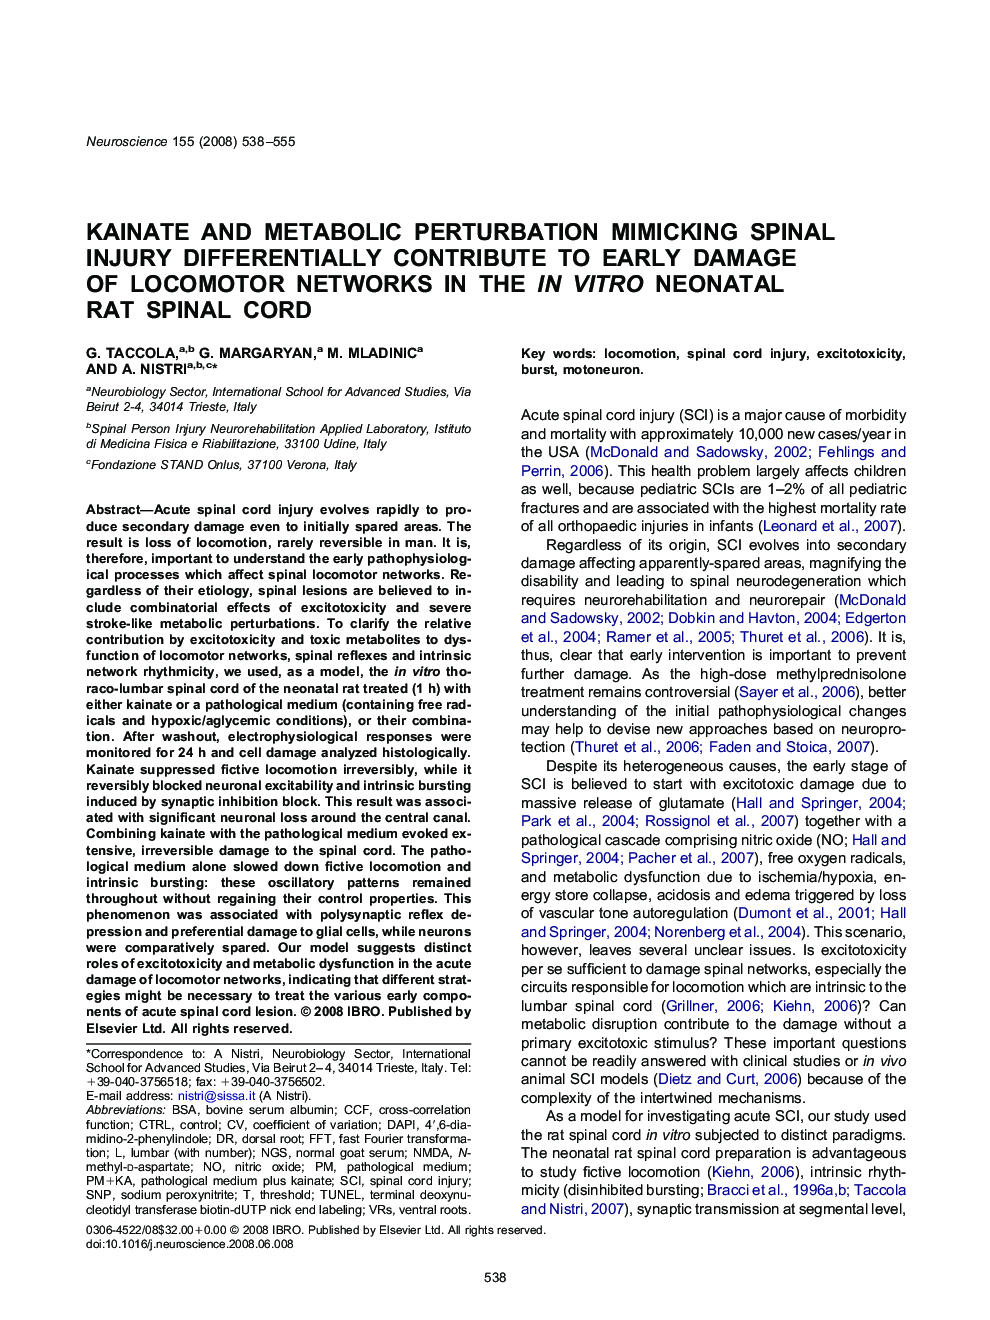 Kainate and metabolic perturbation mimicking spinal injury differentially contribute to early damage of locomotor networks in the in vitro neonatal rat spinal cord